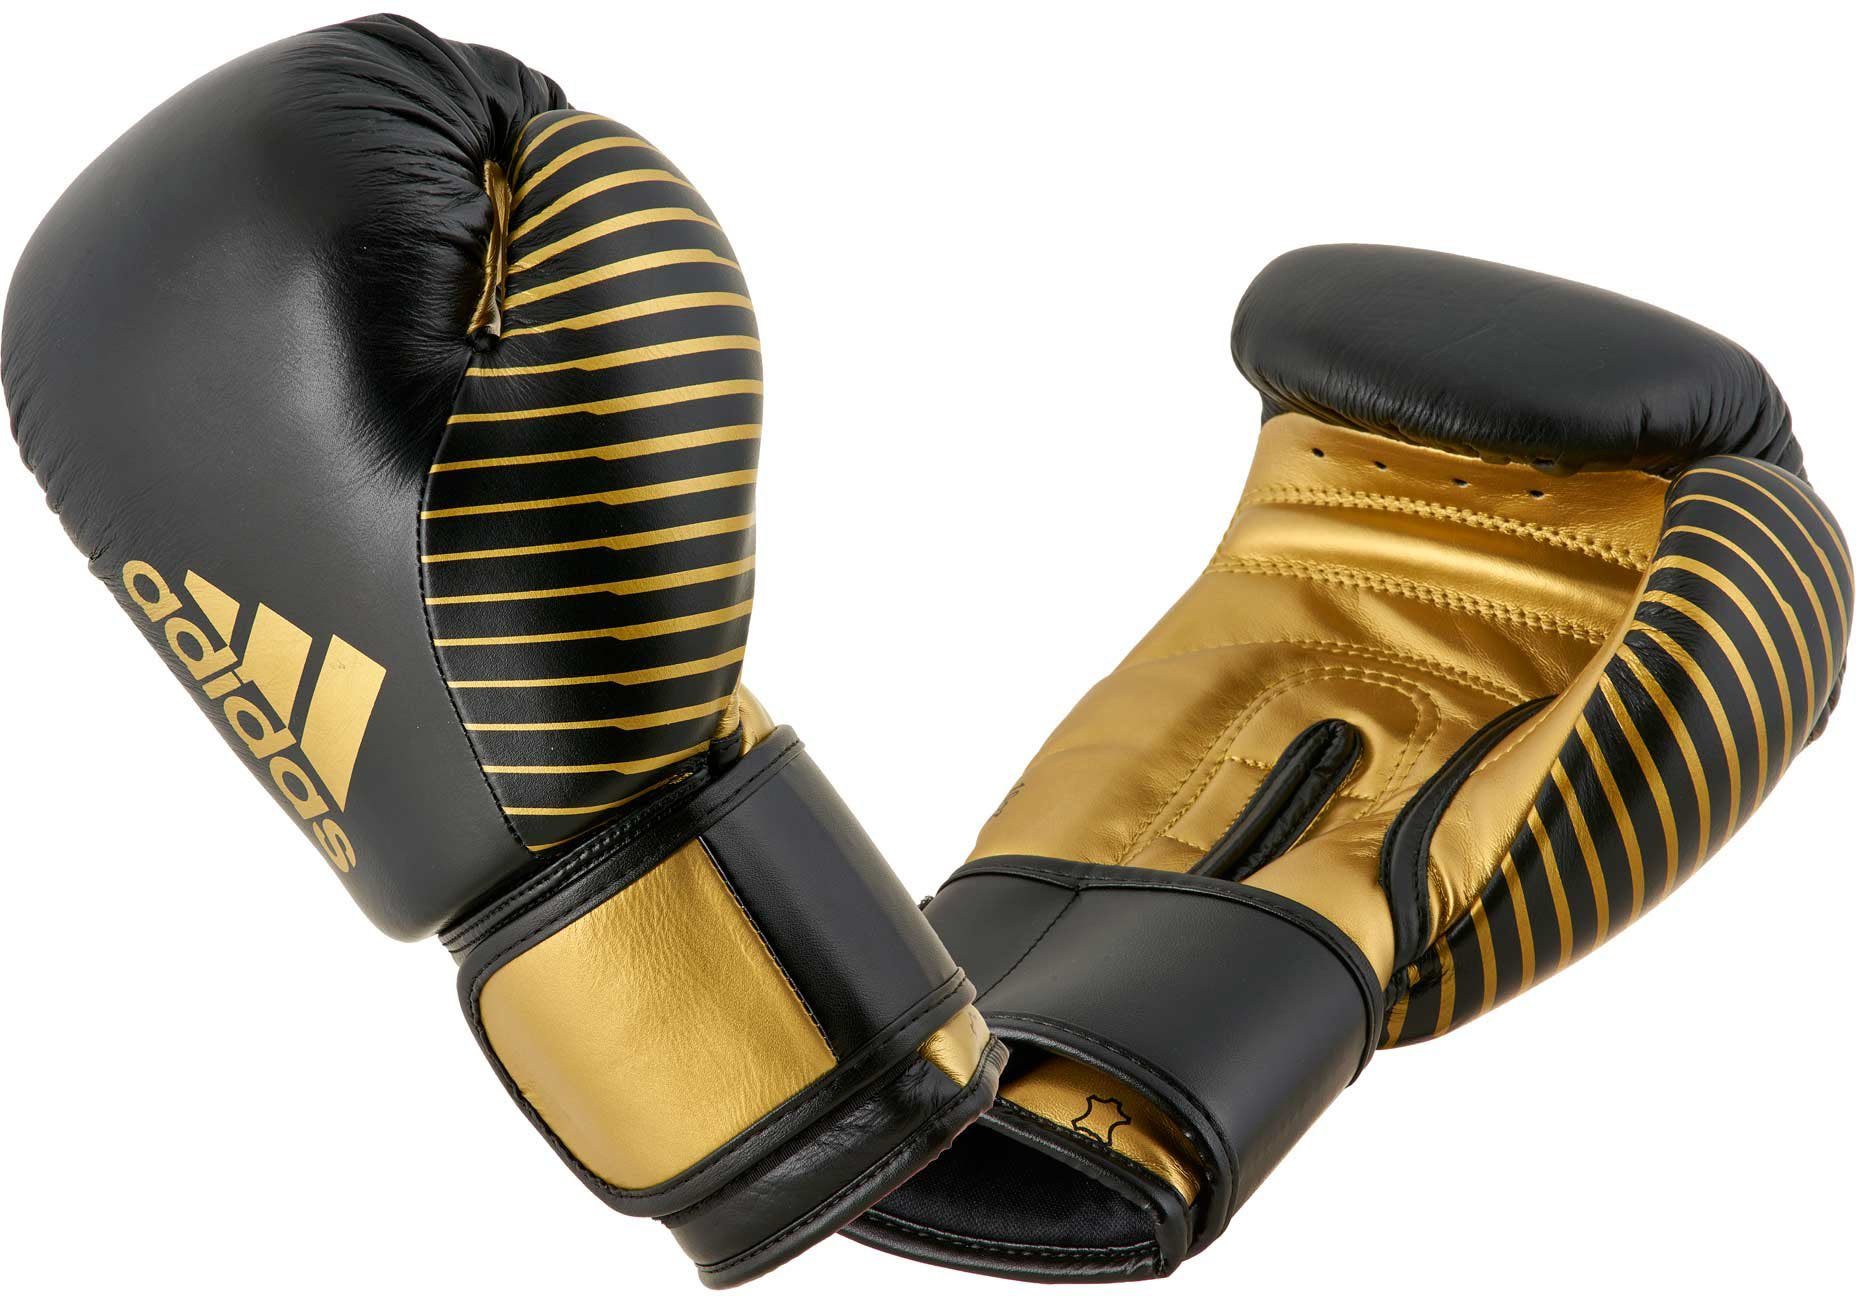 adidas Performance Boxhandschuhe Competition Handschuh black/gold